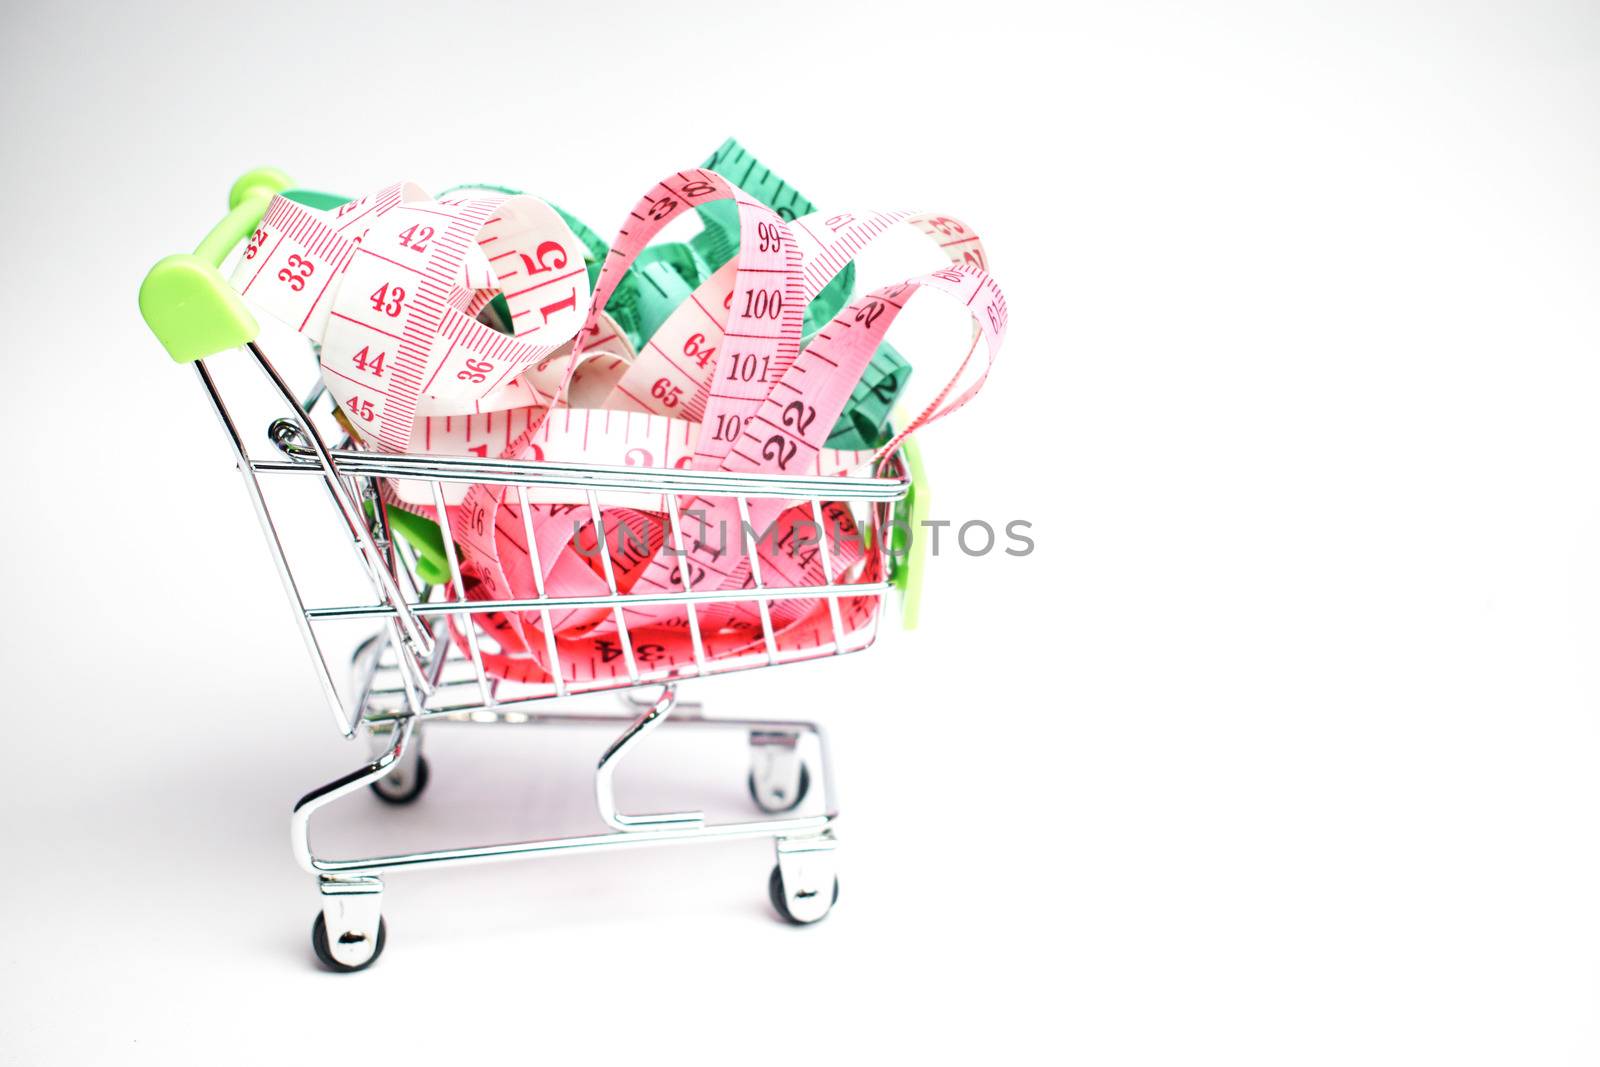 A shopping cart with some tape measures inside